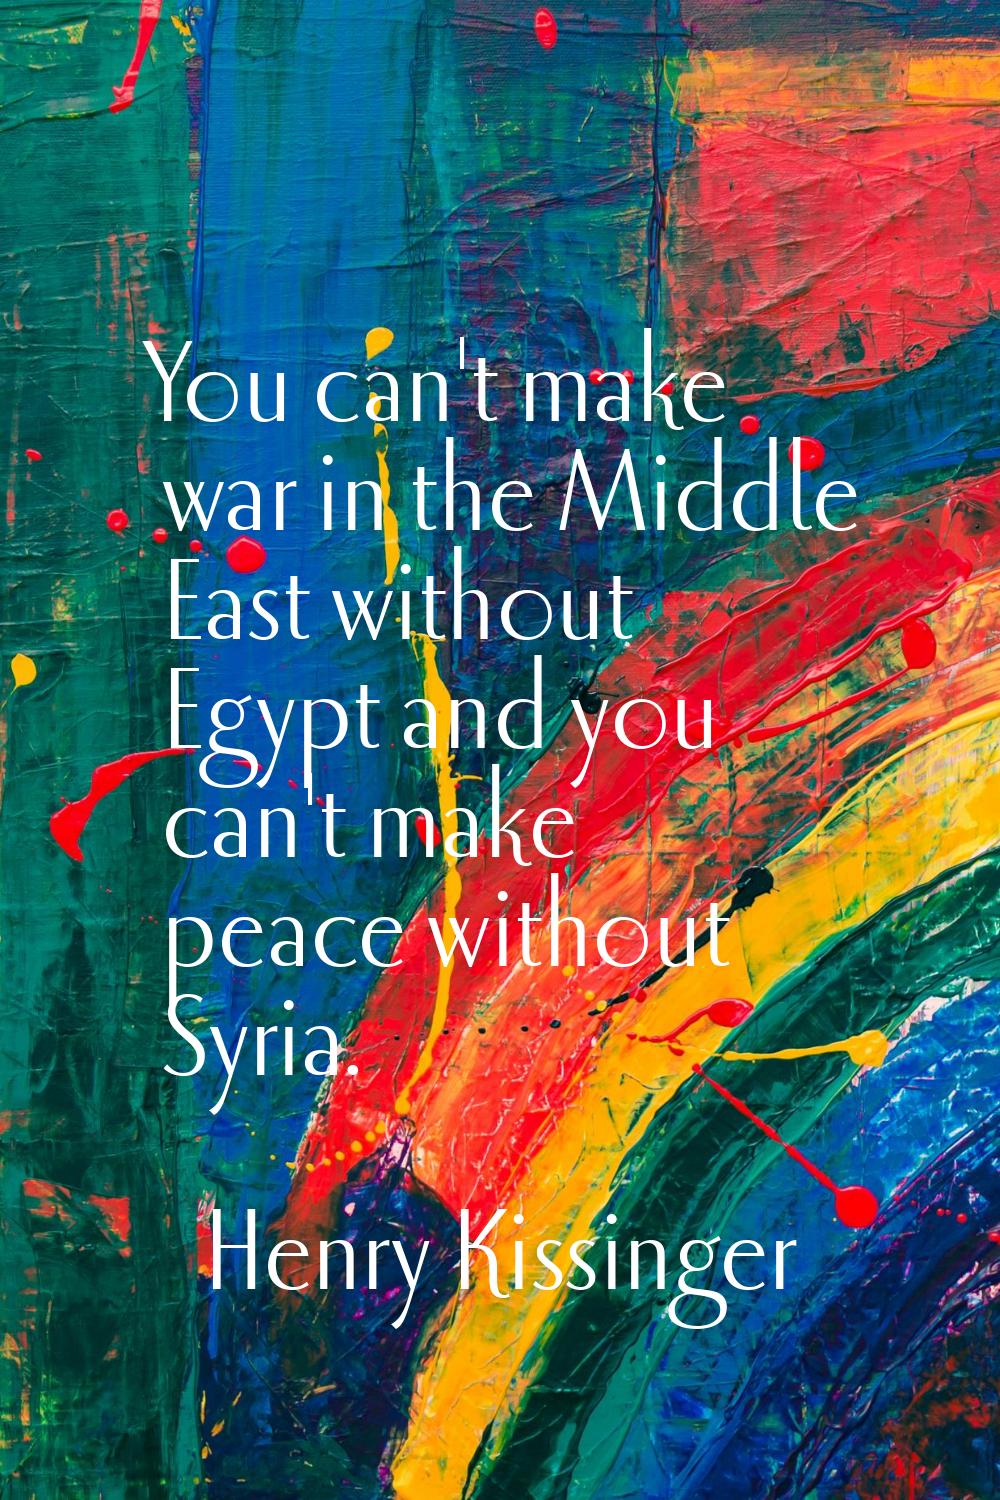 You can't make war in the Middle East without Egypt and you can't make peace without Syria.